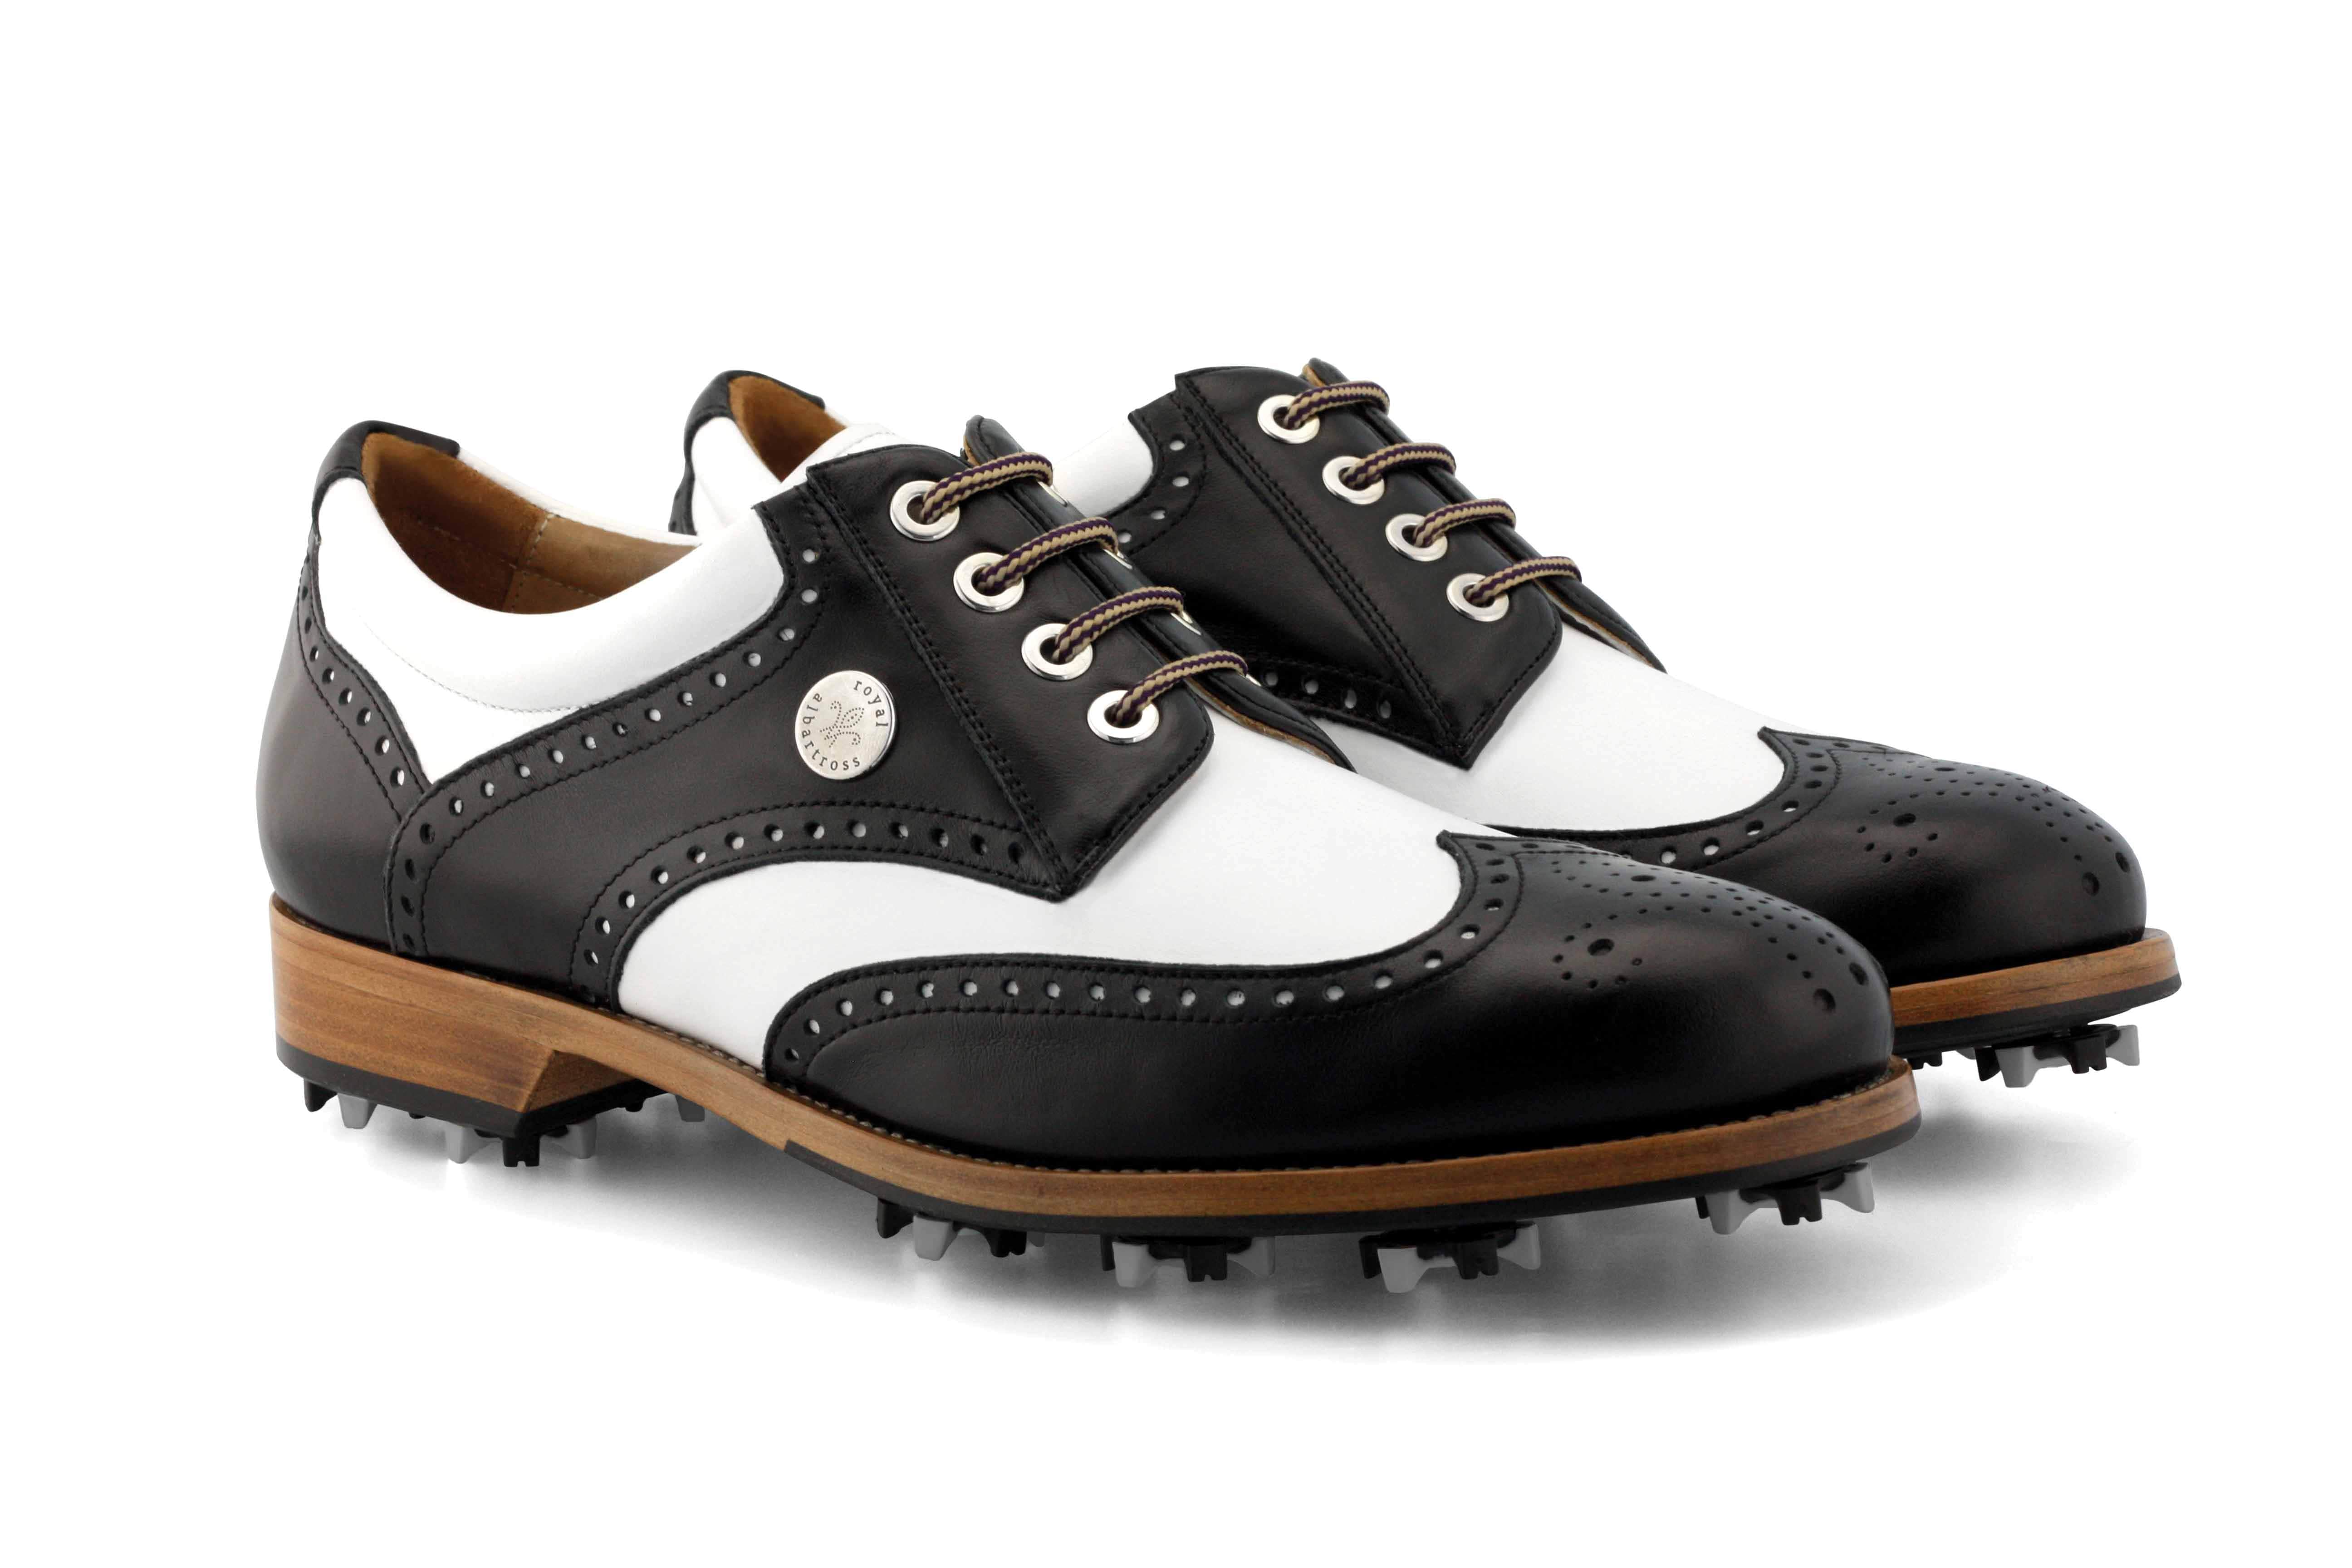 Men's Spiked Golf Shoe | Cleated White & Black | Royal Albartross Squire